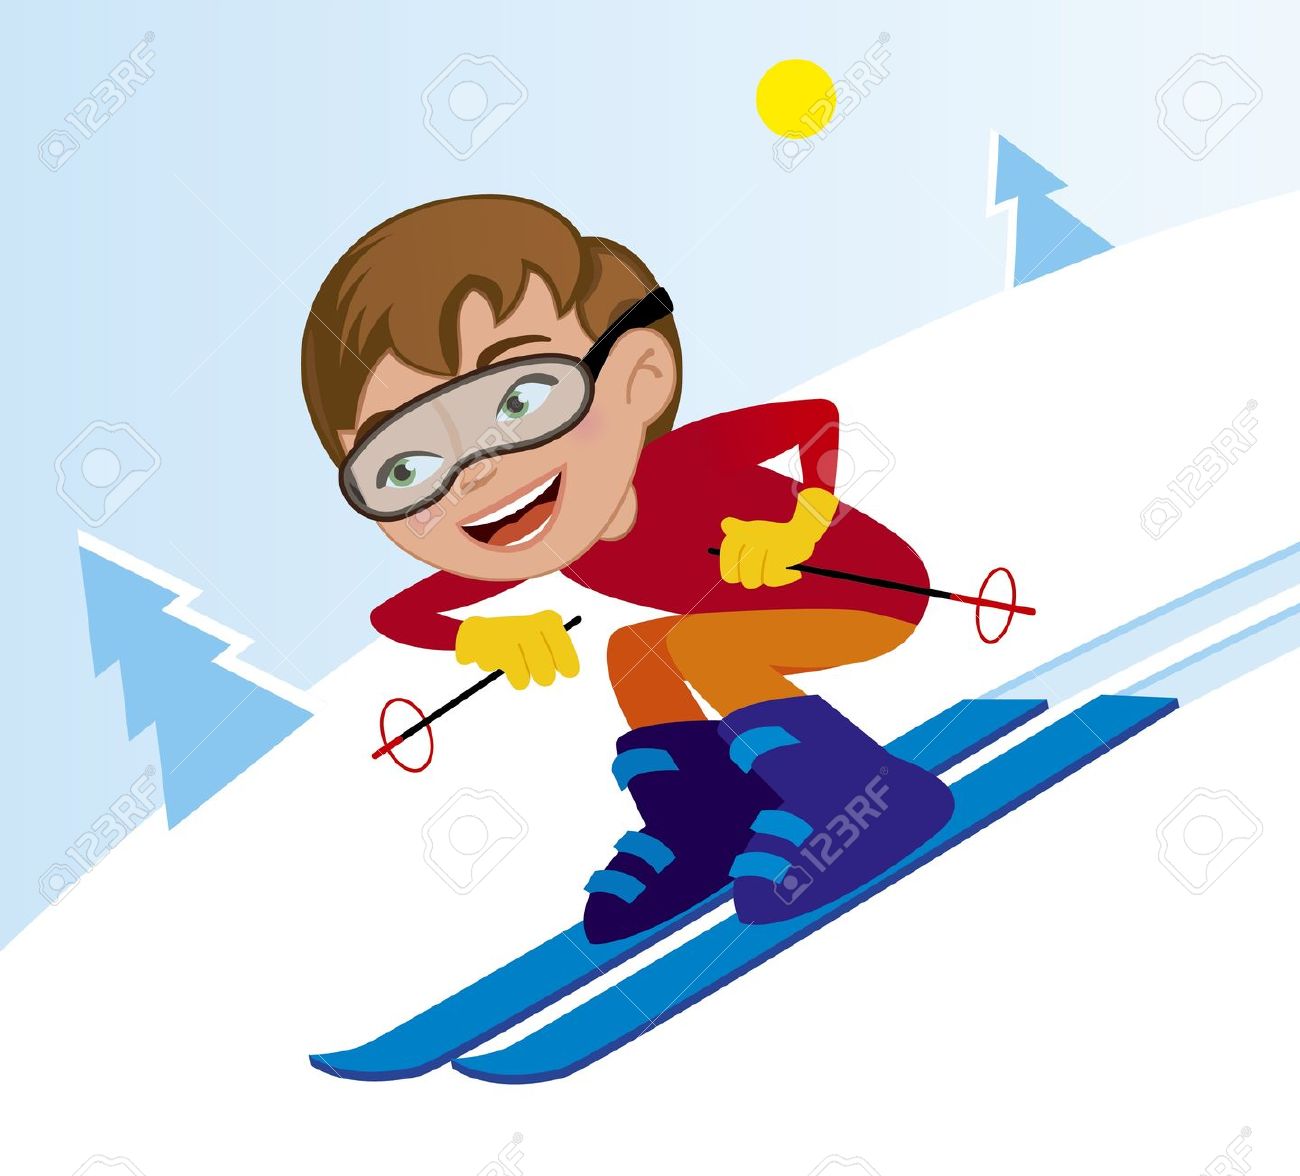 Downhill skiing clipart 20 free Cliparts | Download images on ...